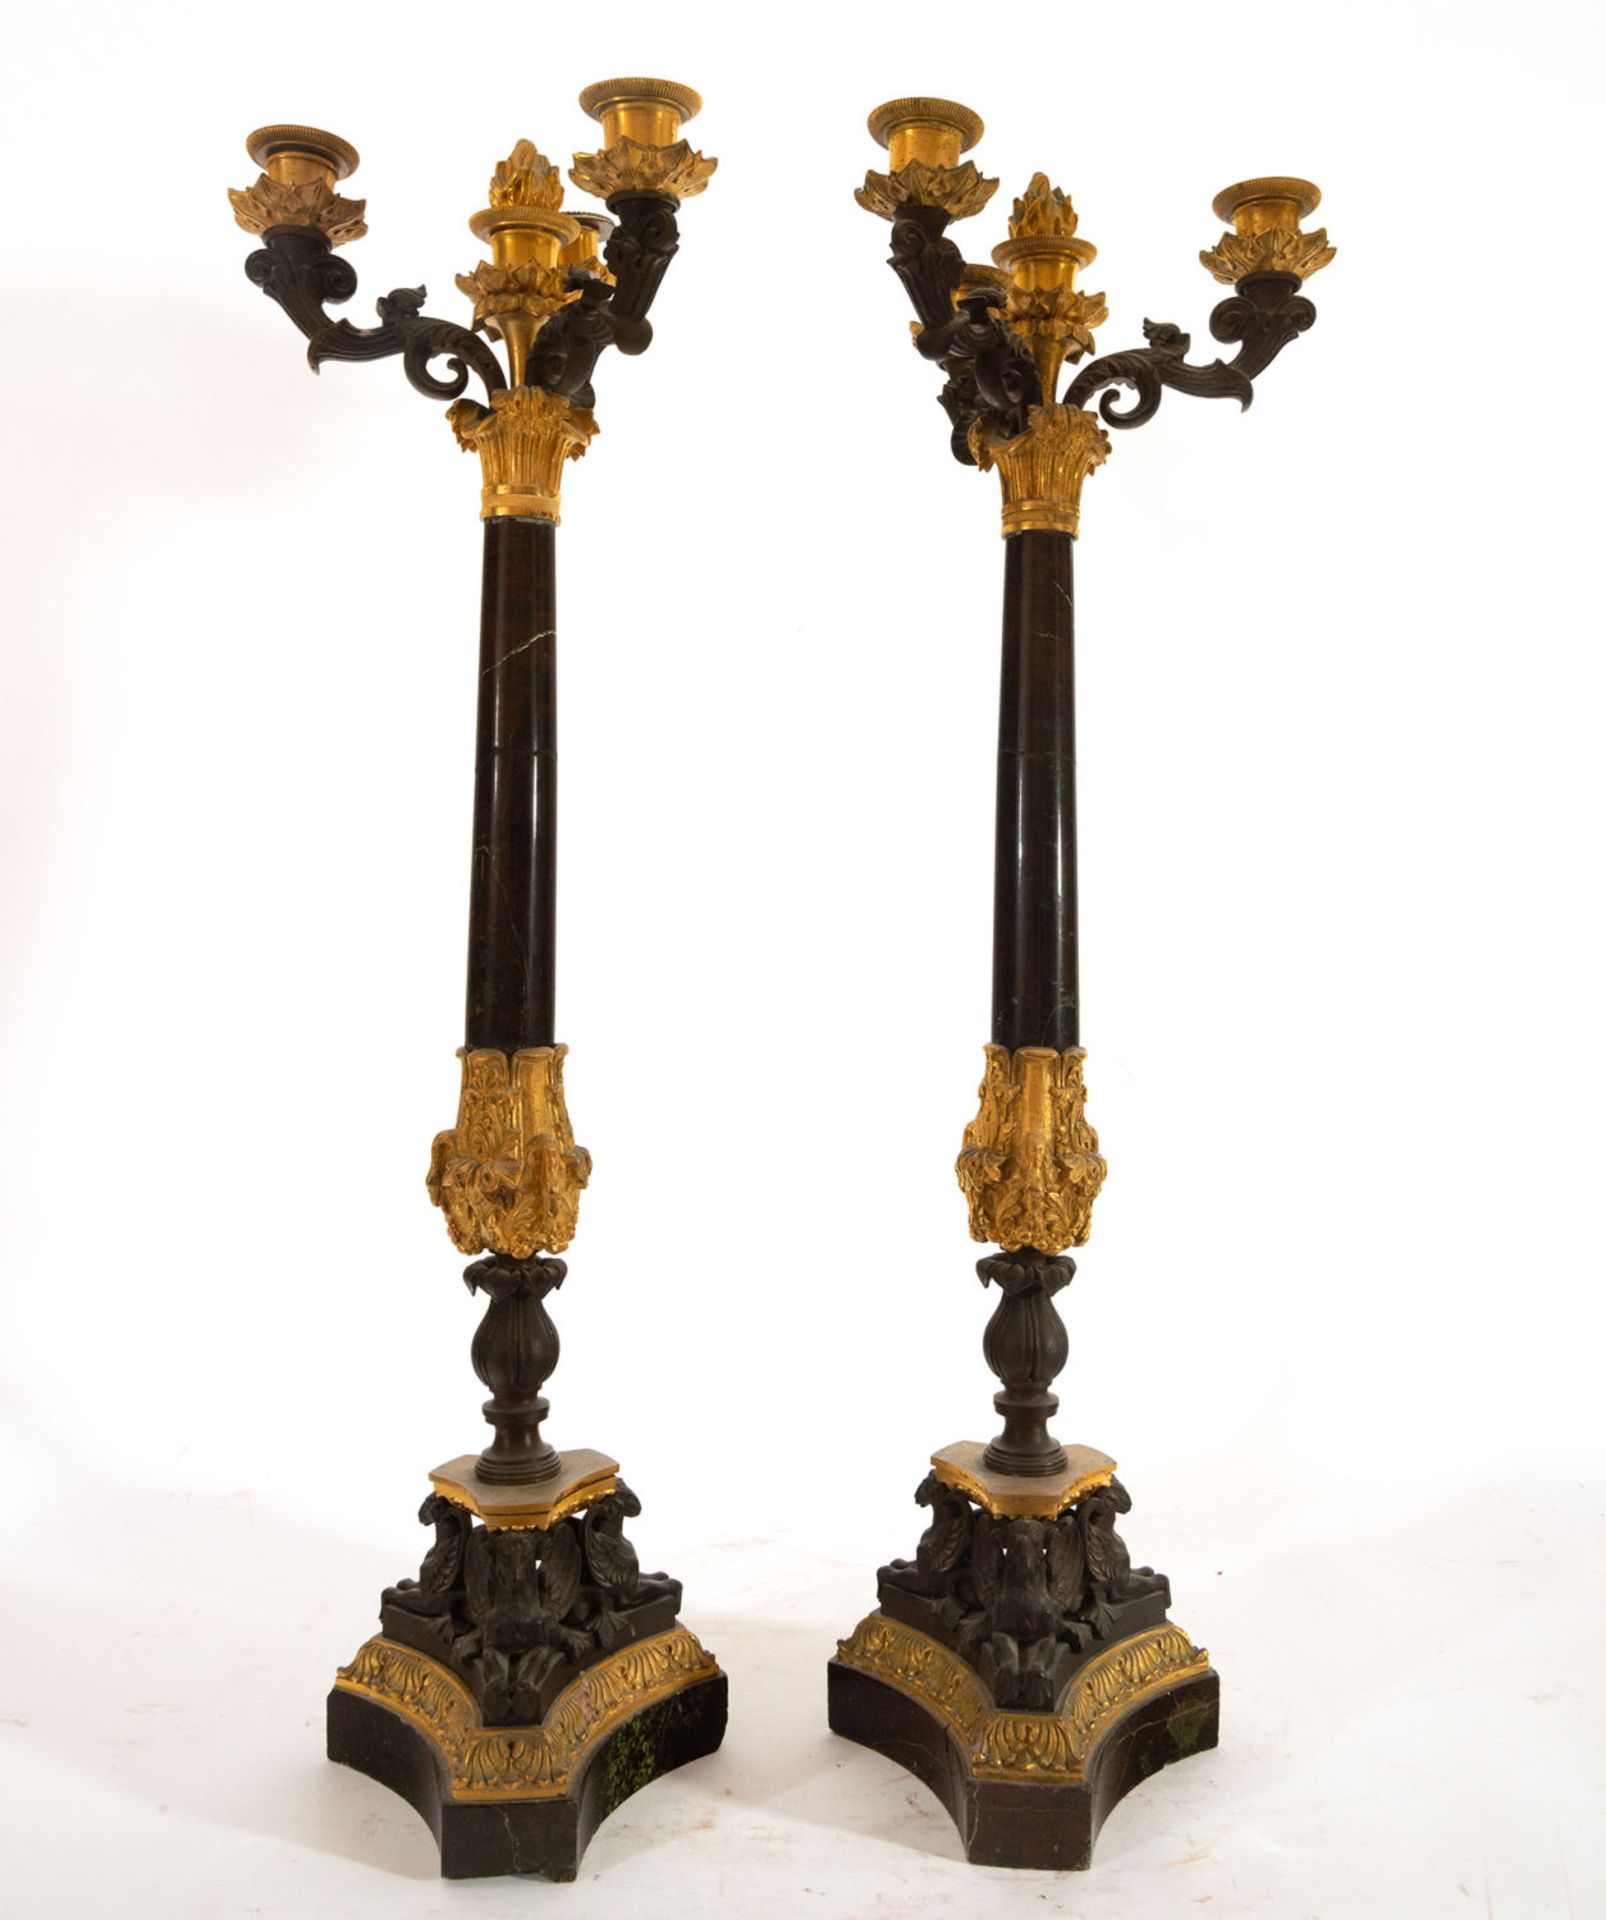 Pair of Candlesticks in Pink Marble, gilt bronze and Empire style patination, 19th century - Bild 2 aus 2